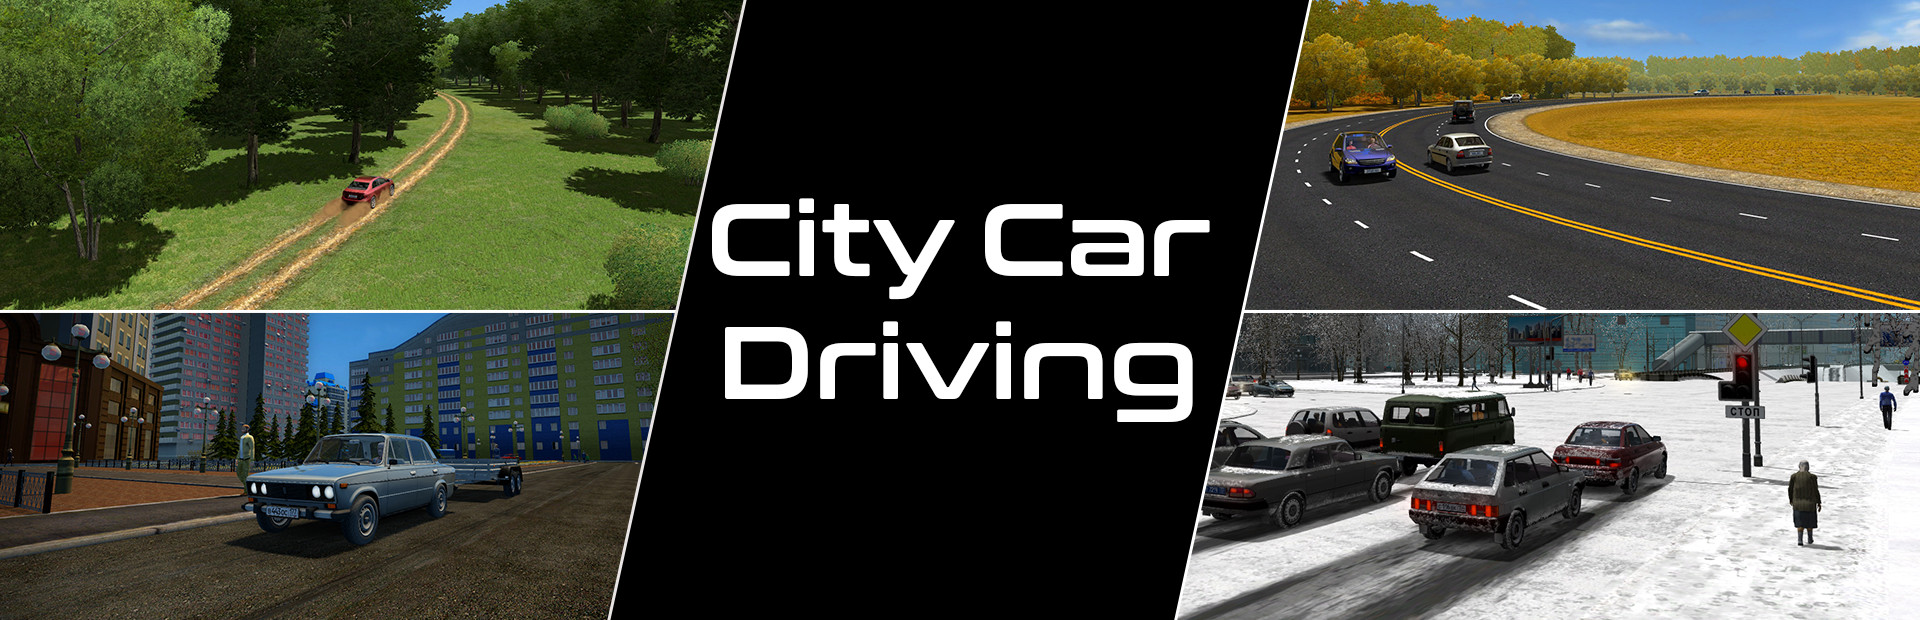 City Car Driving cover image